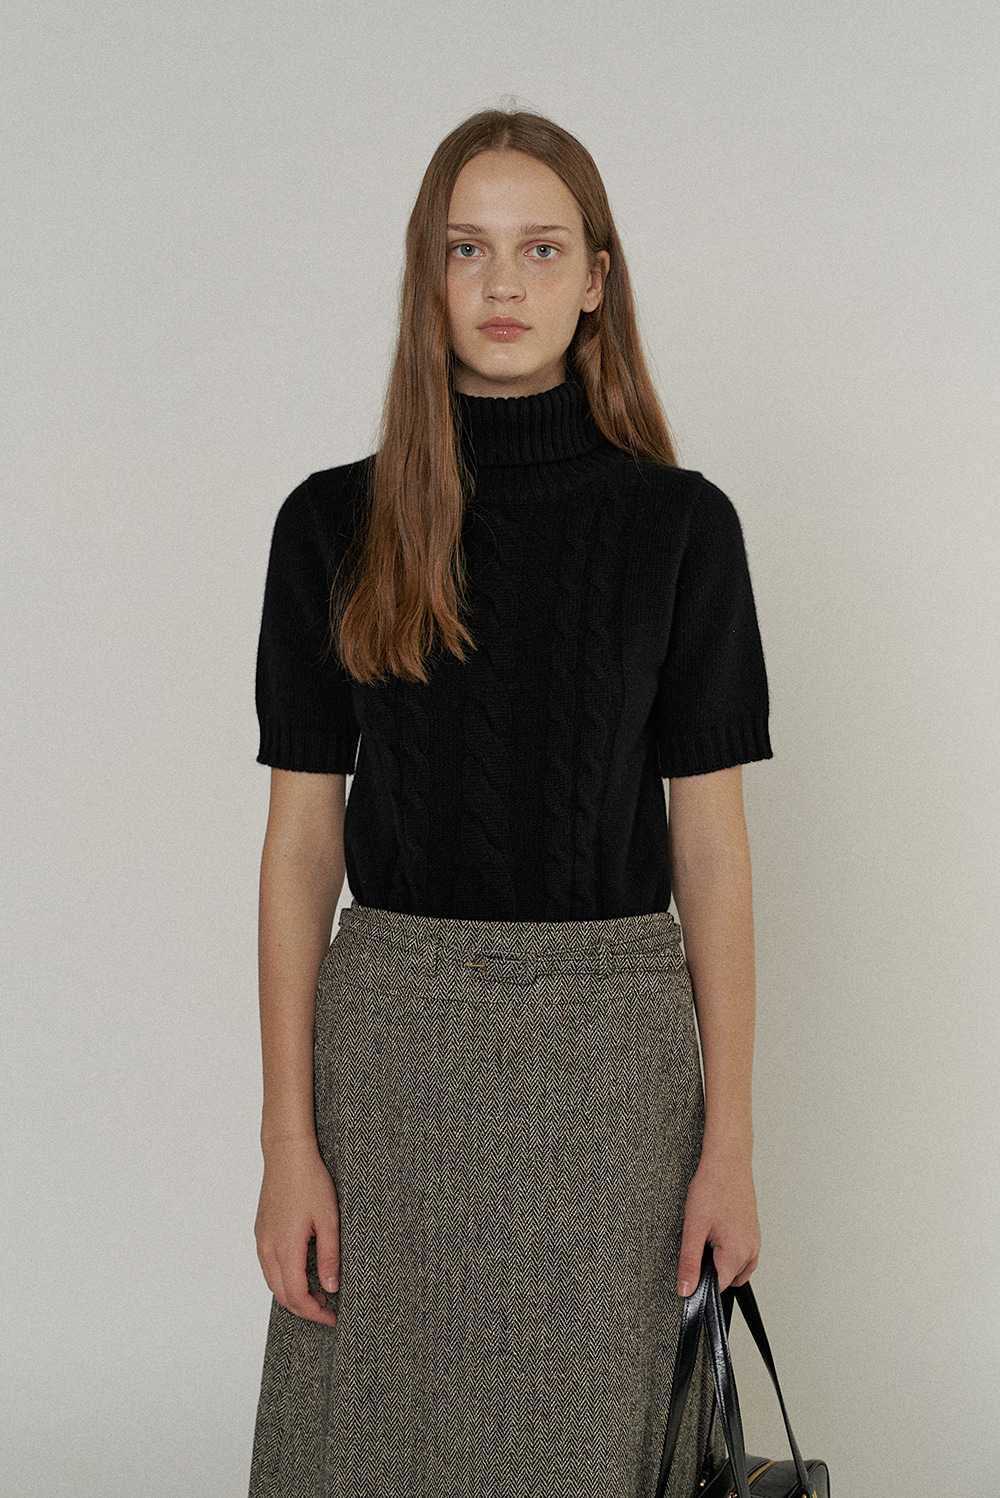 John Cable Sweater in Black